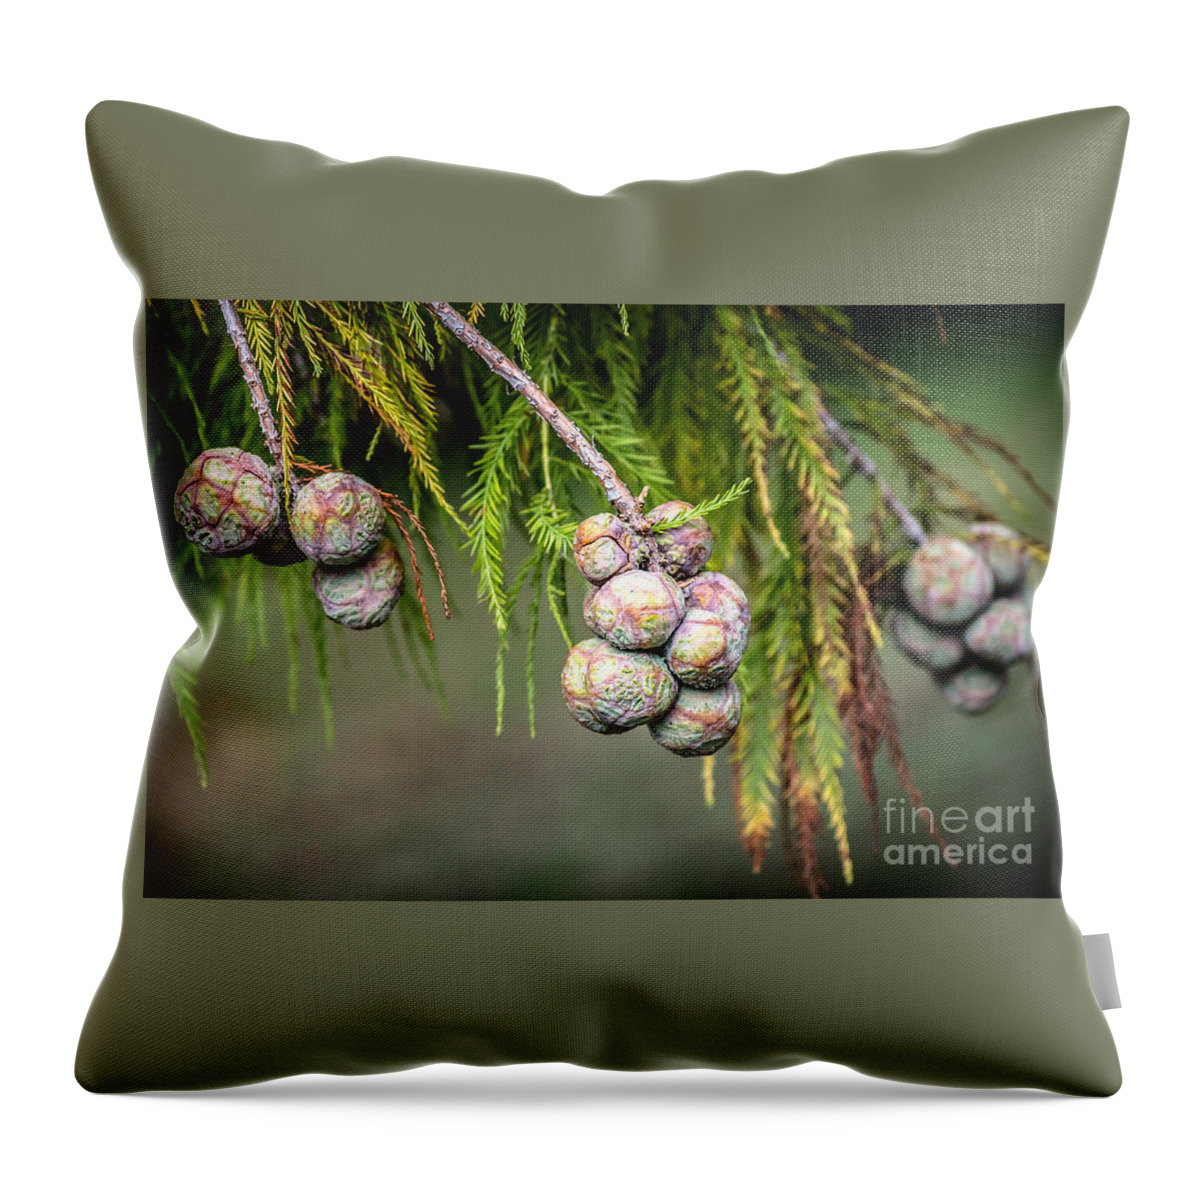 Bald Throw Pillow featuring the photograph Bald Cypress tree seed pods by Imagery by Charly